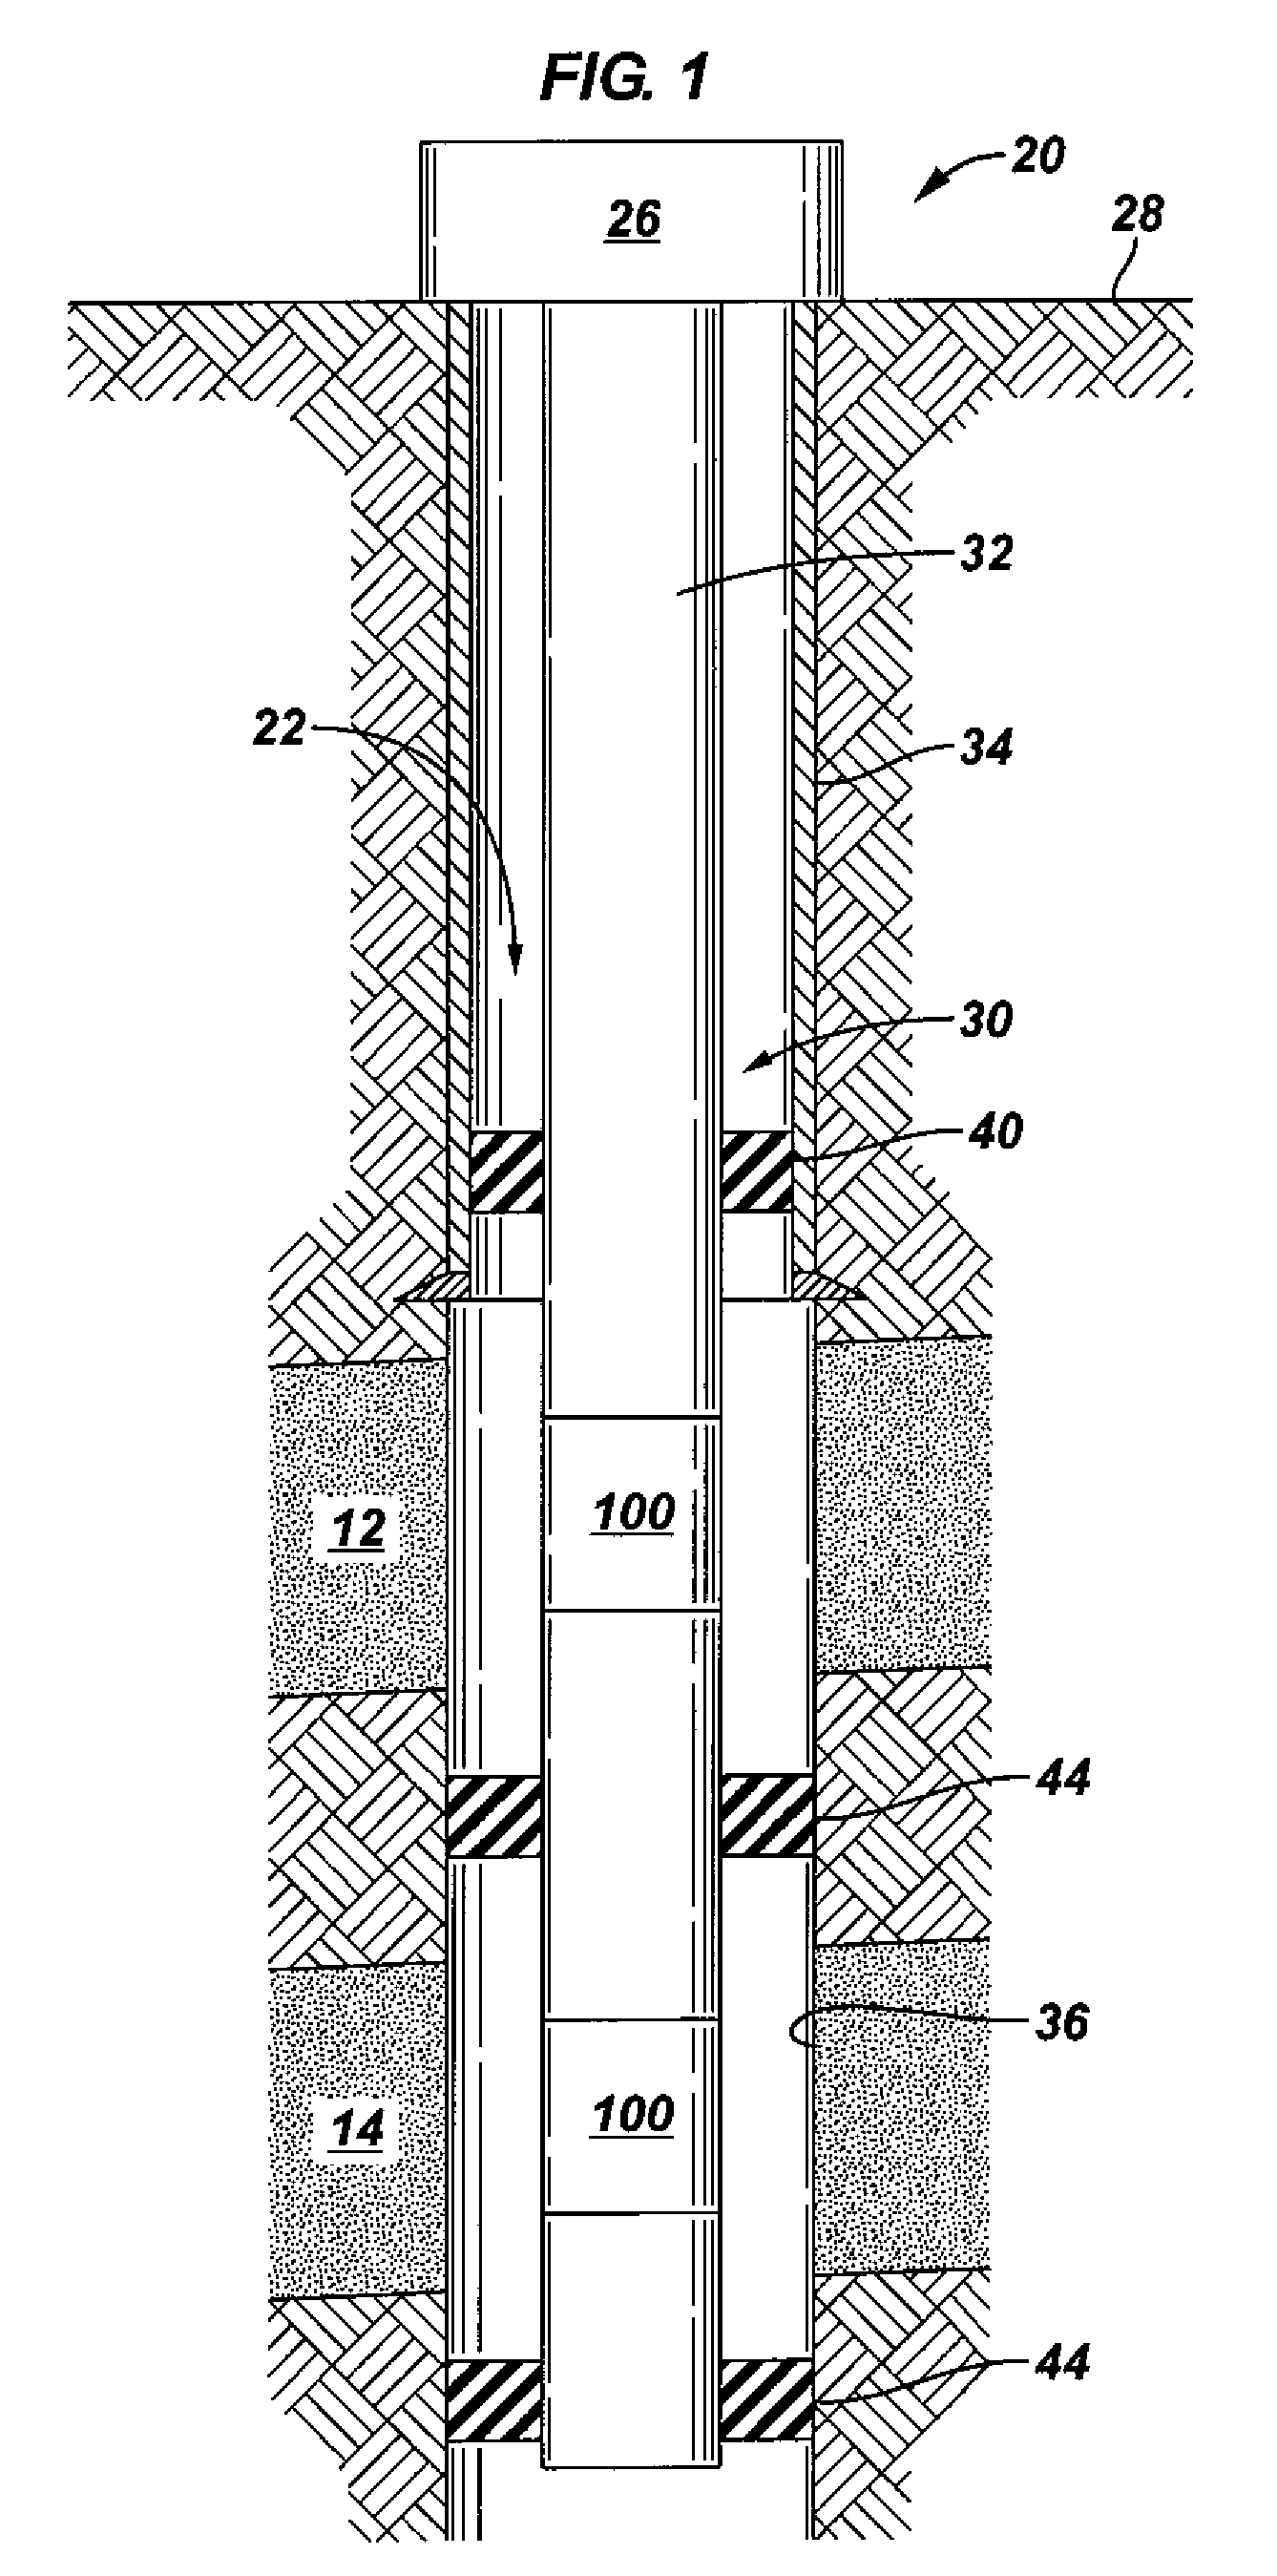 Method of completing a well using a retrievable inflow control device